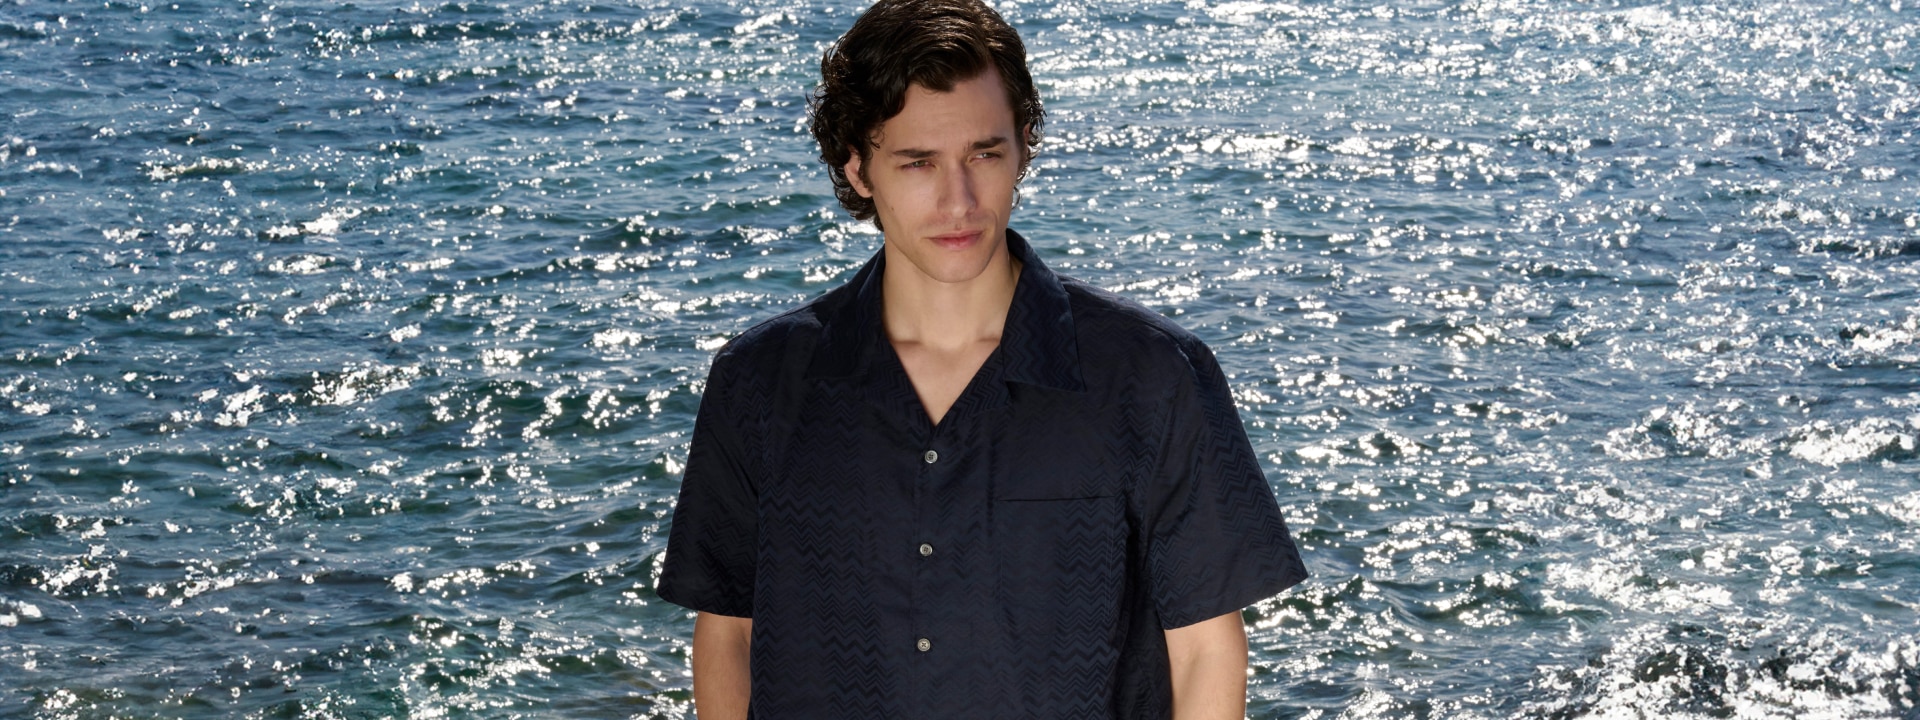 A model is wearing a blue shirt by the seaside